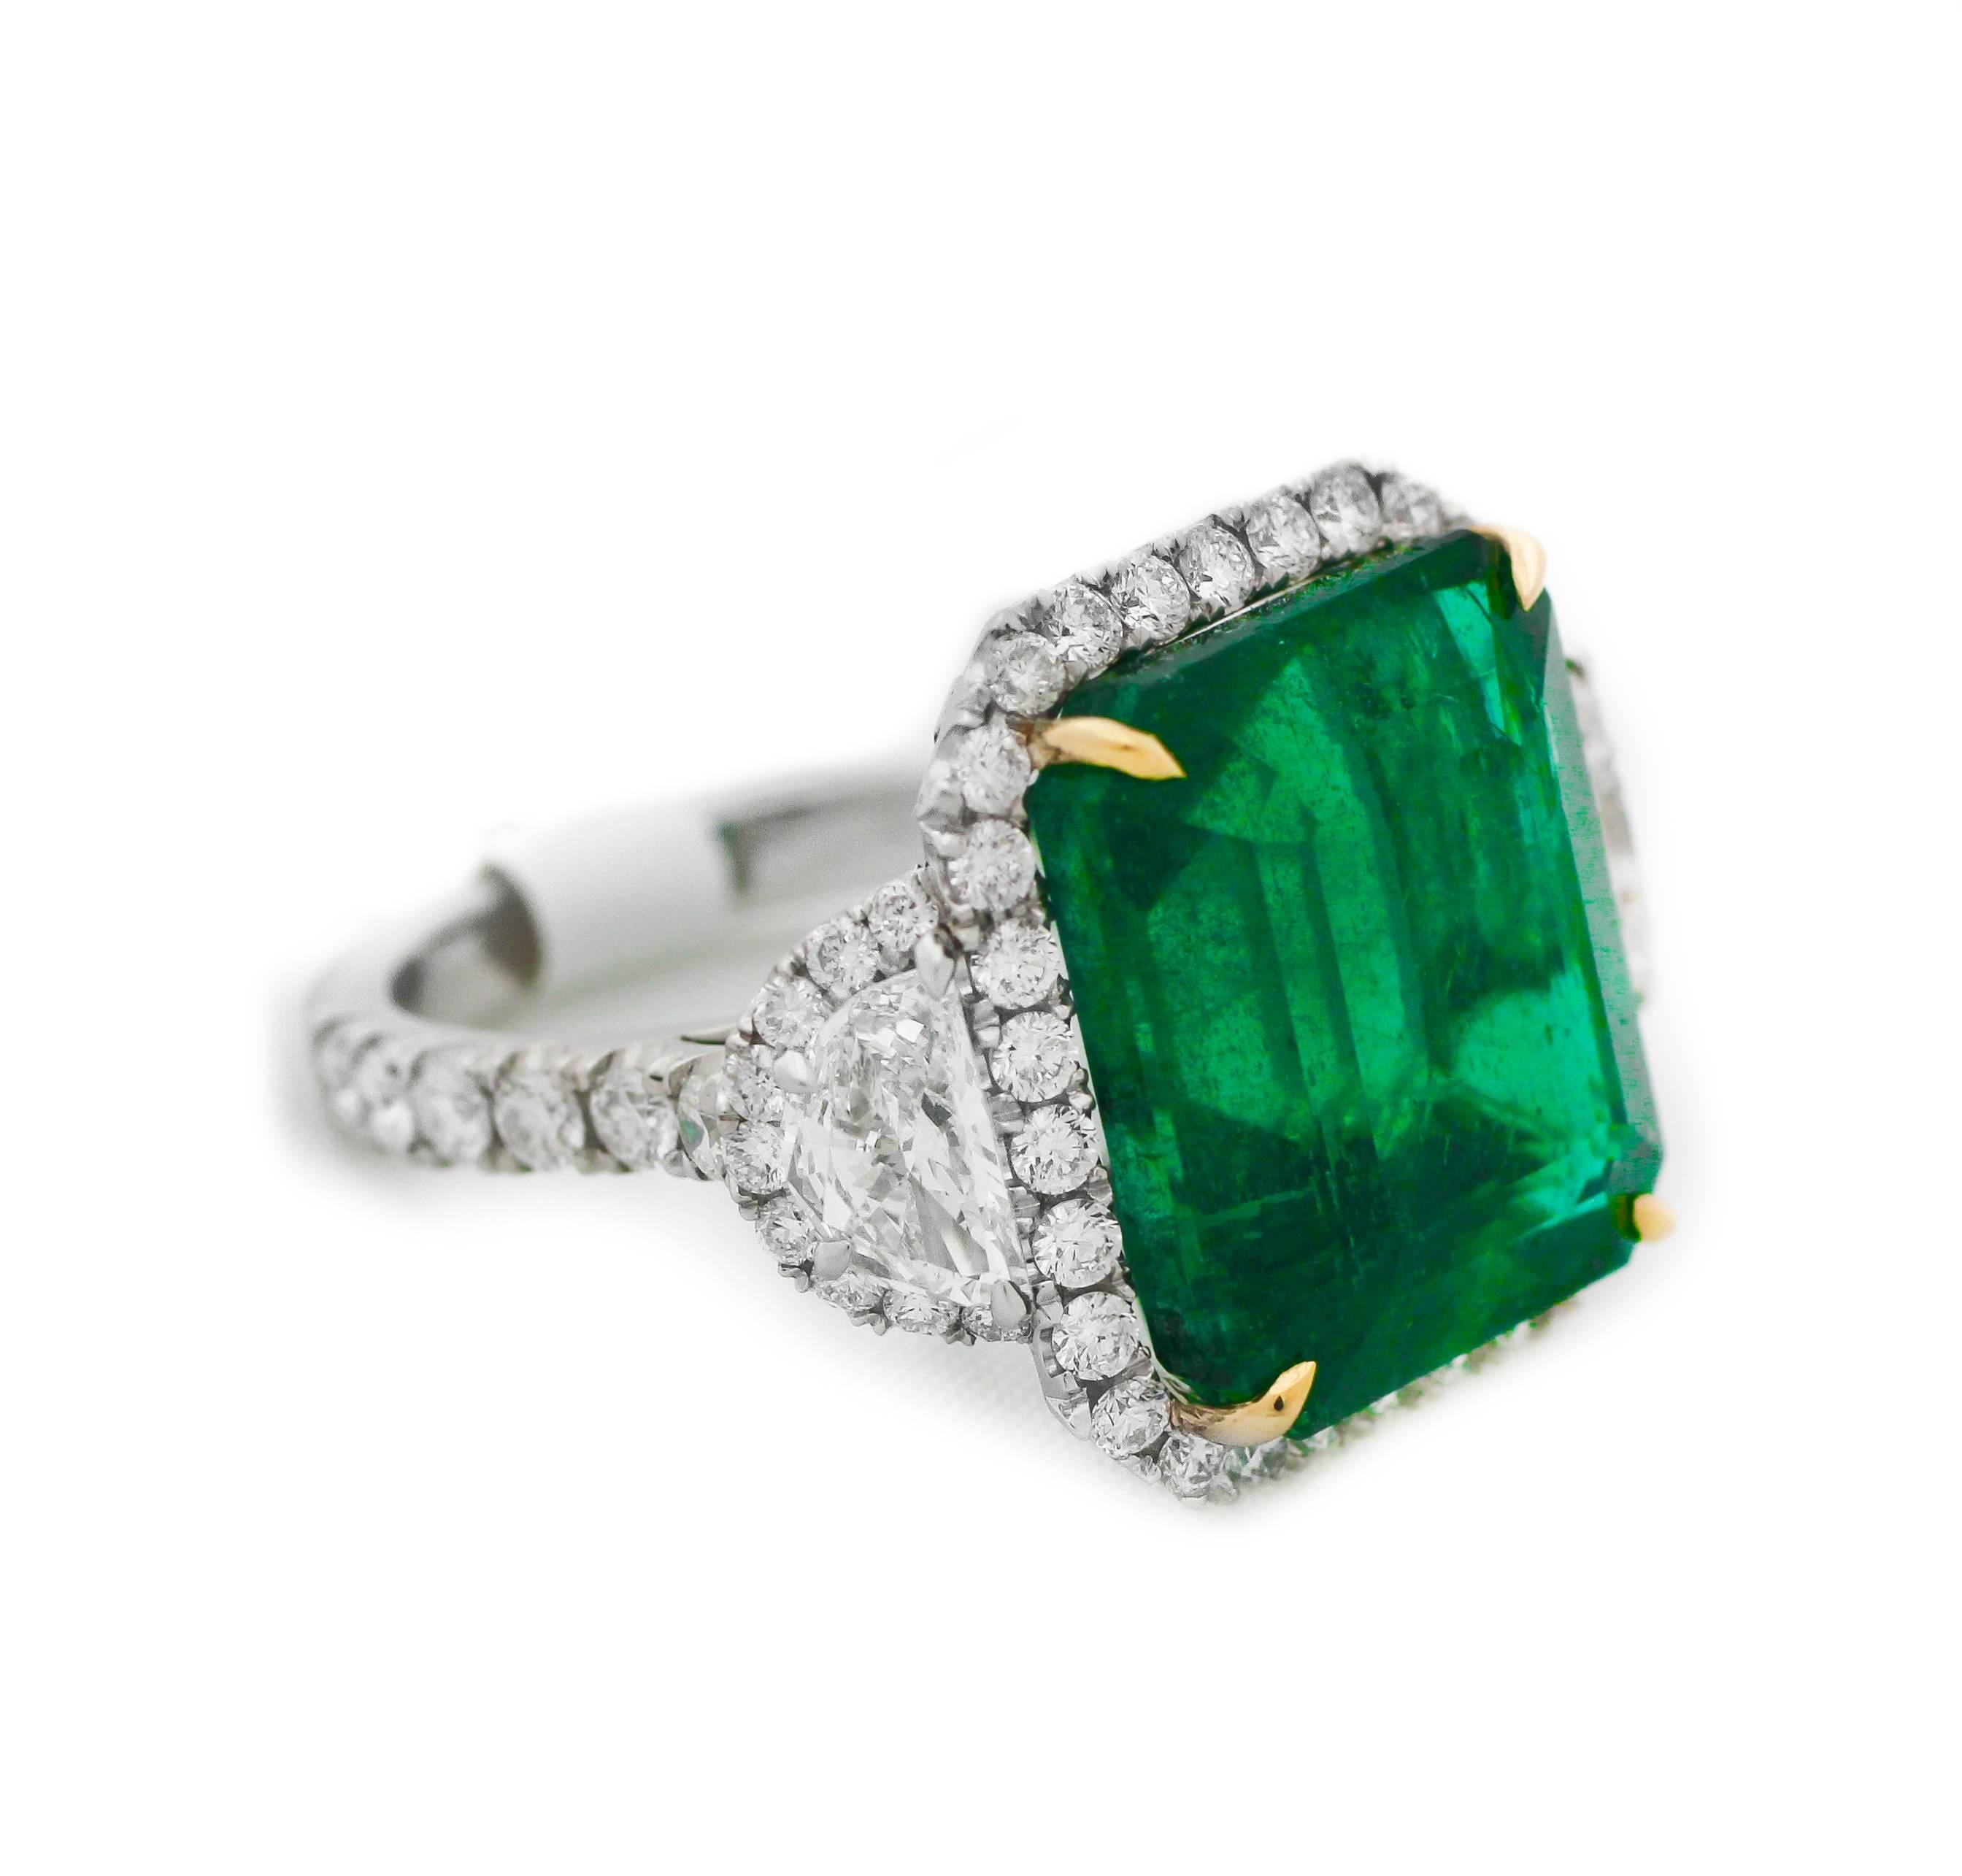 GIA Certified Green Emerald and Diamond Ring, Features 14.13 Carats Emerald Cut Green Emerald, Certified by GIA, set with two half moons, surrounded by round brilliant cut diamonds, totaling 3.50 Carats of Diamonds 
Made in Platinum 
